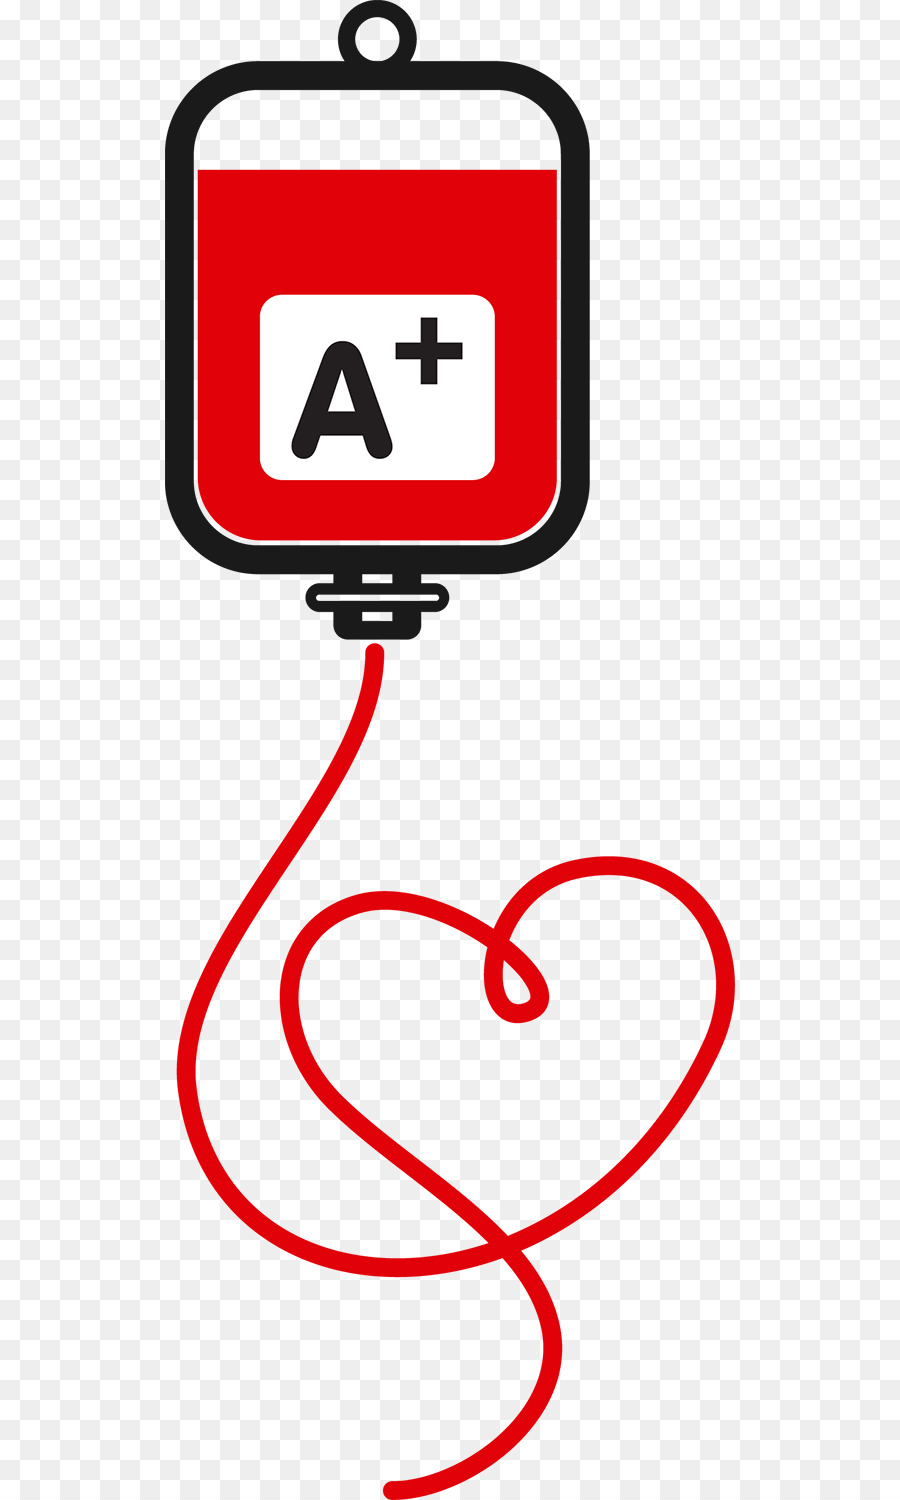 Blood donation Blood transfusion - Simple blood bag vector png download - 570*1500 - Free Transparent Blood Donation png Download.